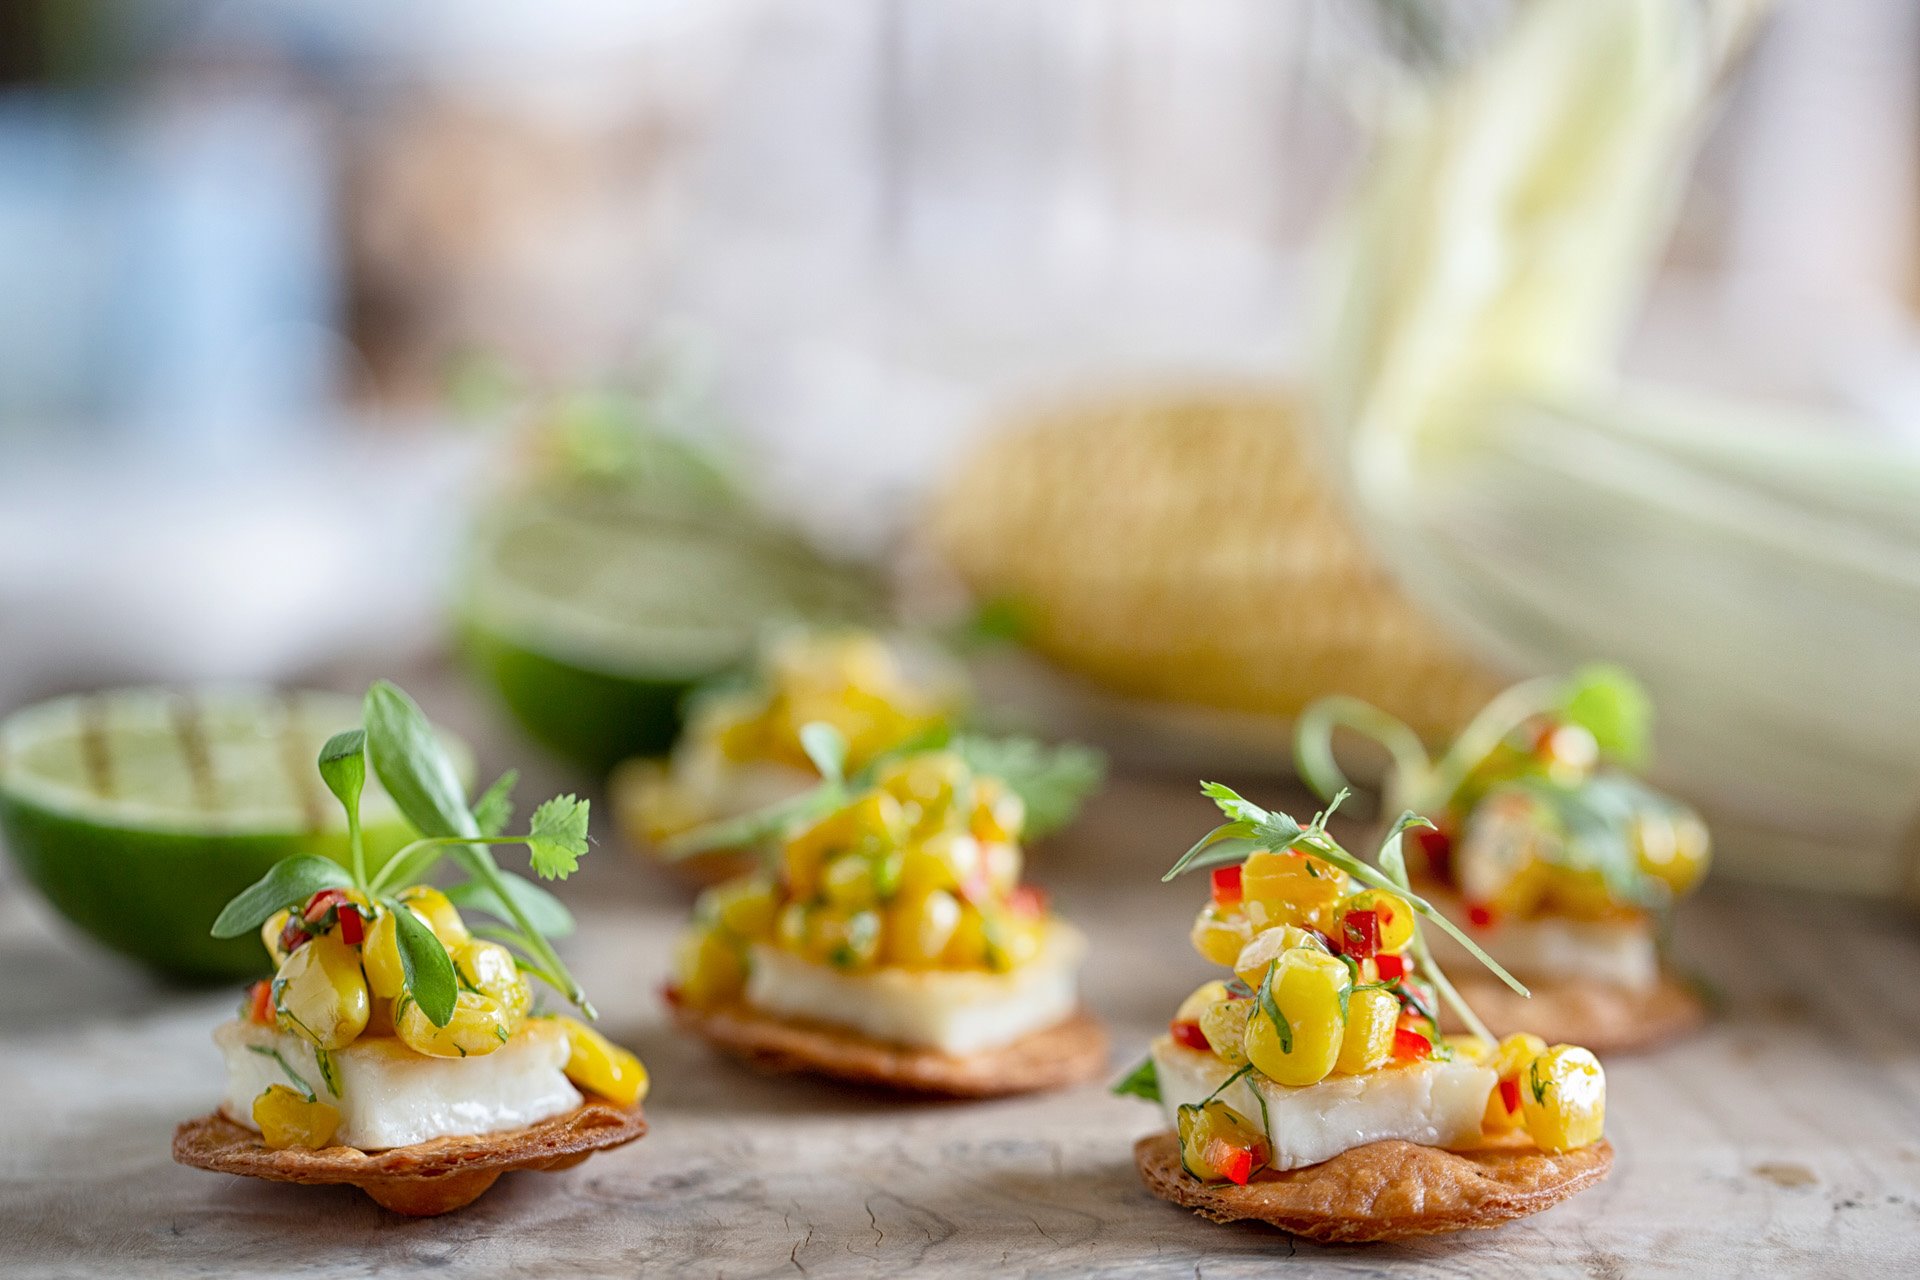 wedding canapes made of freshly picked ingredients fro the walled garden at elmore court